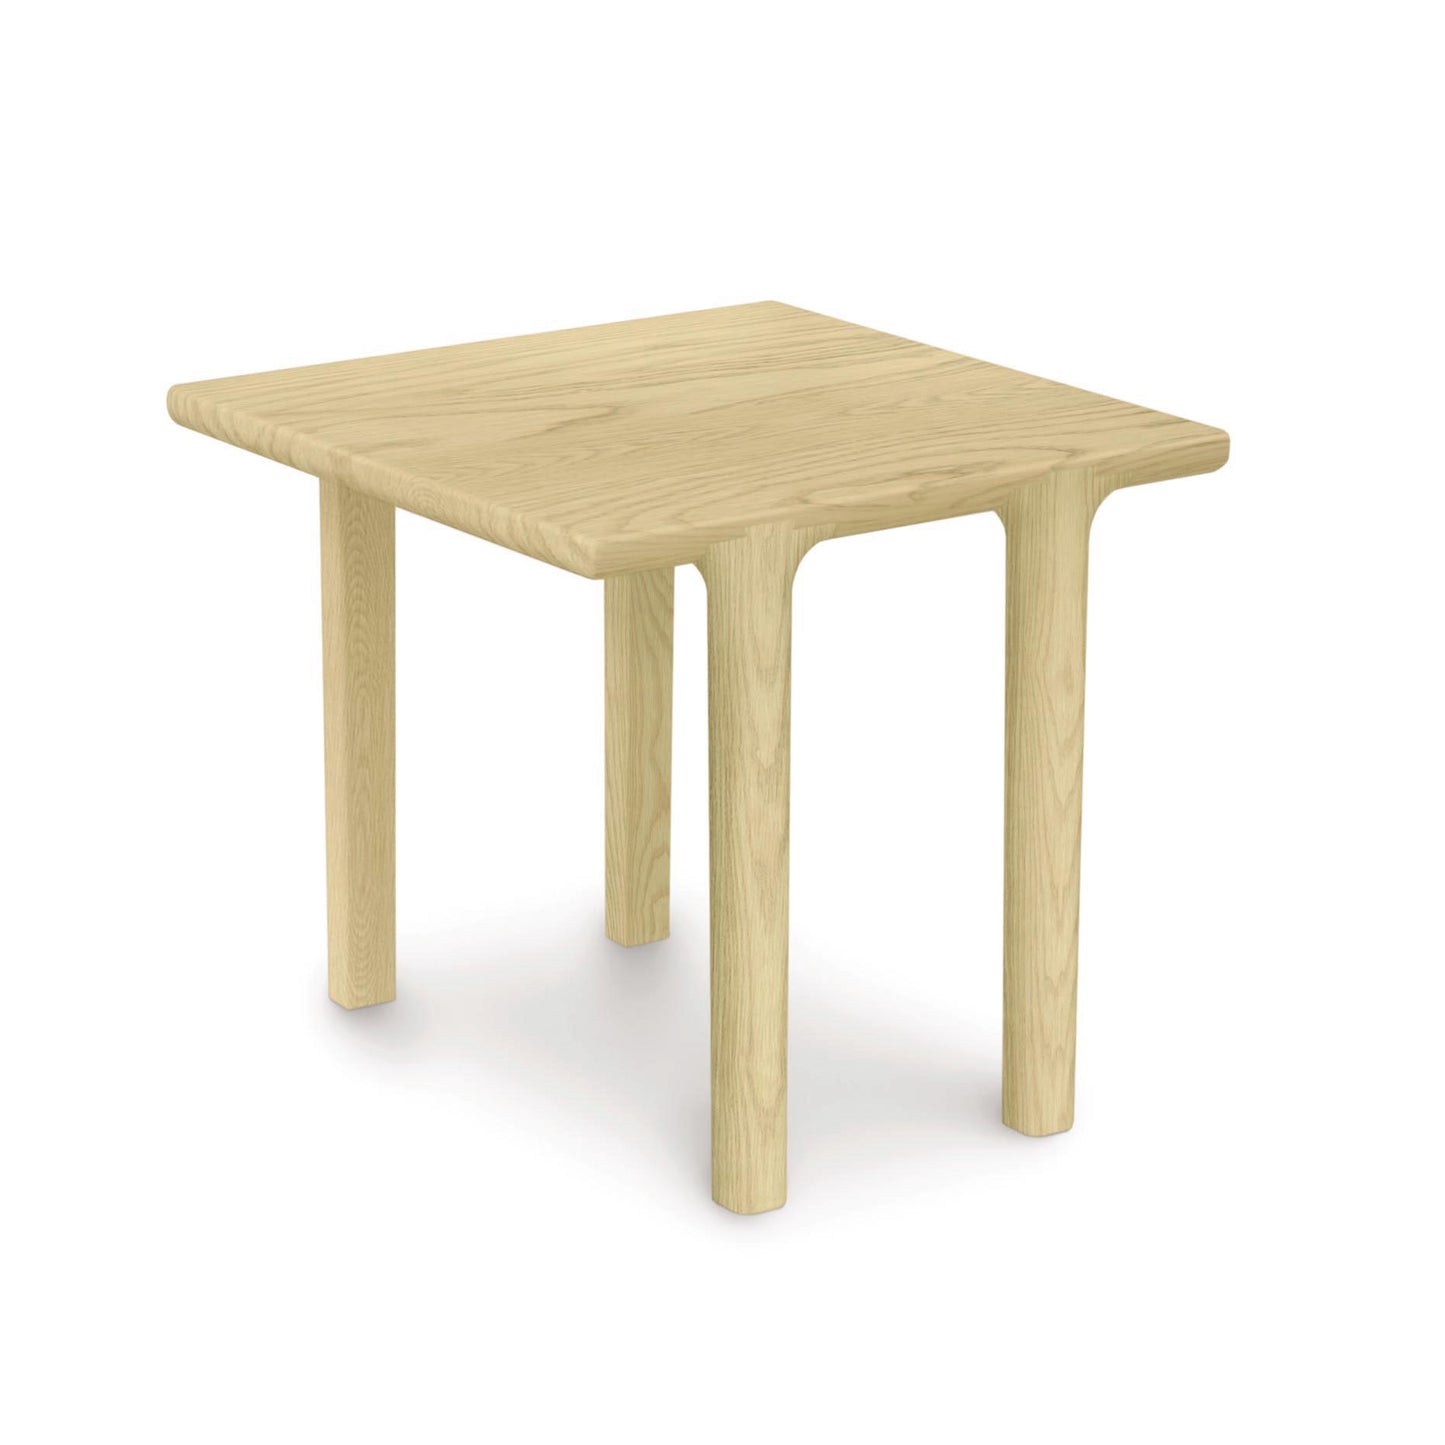 A contemporary Copeland Furniture Sierra Square End Table with two legs on a white background.